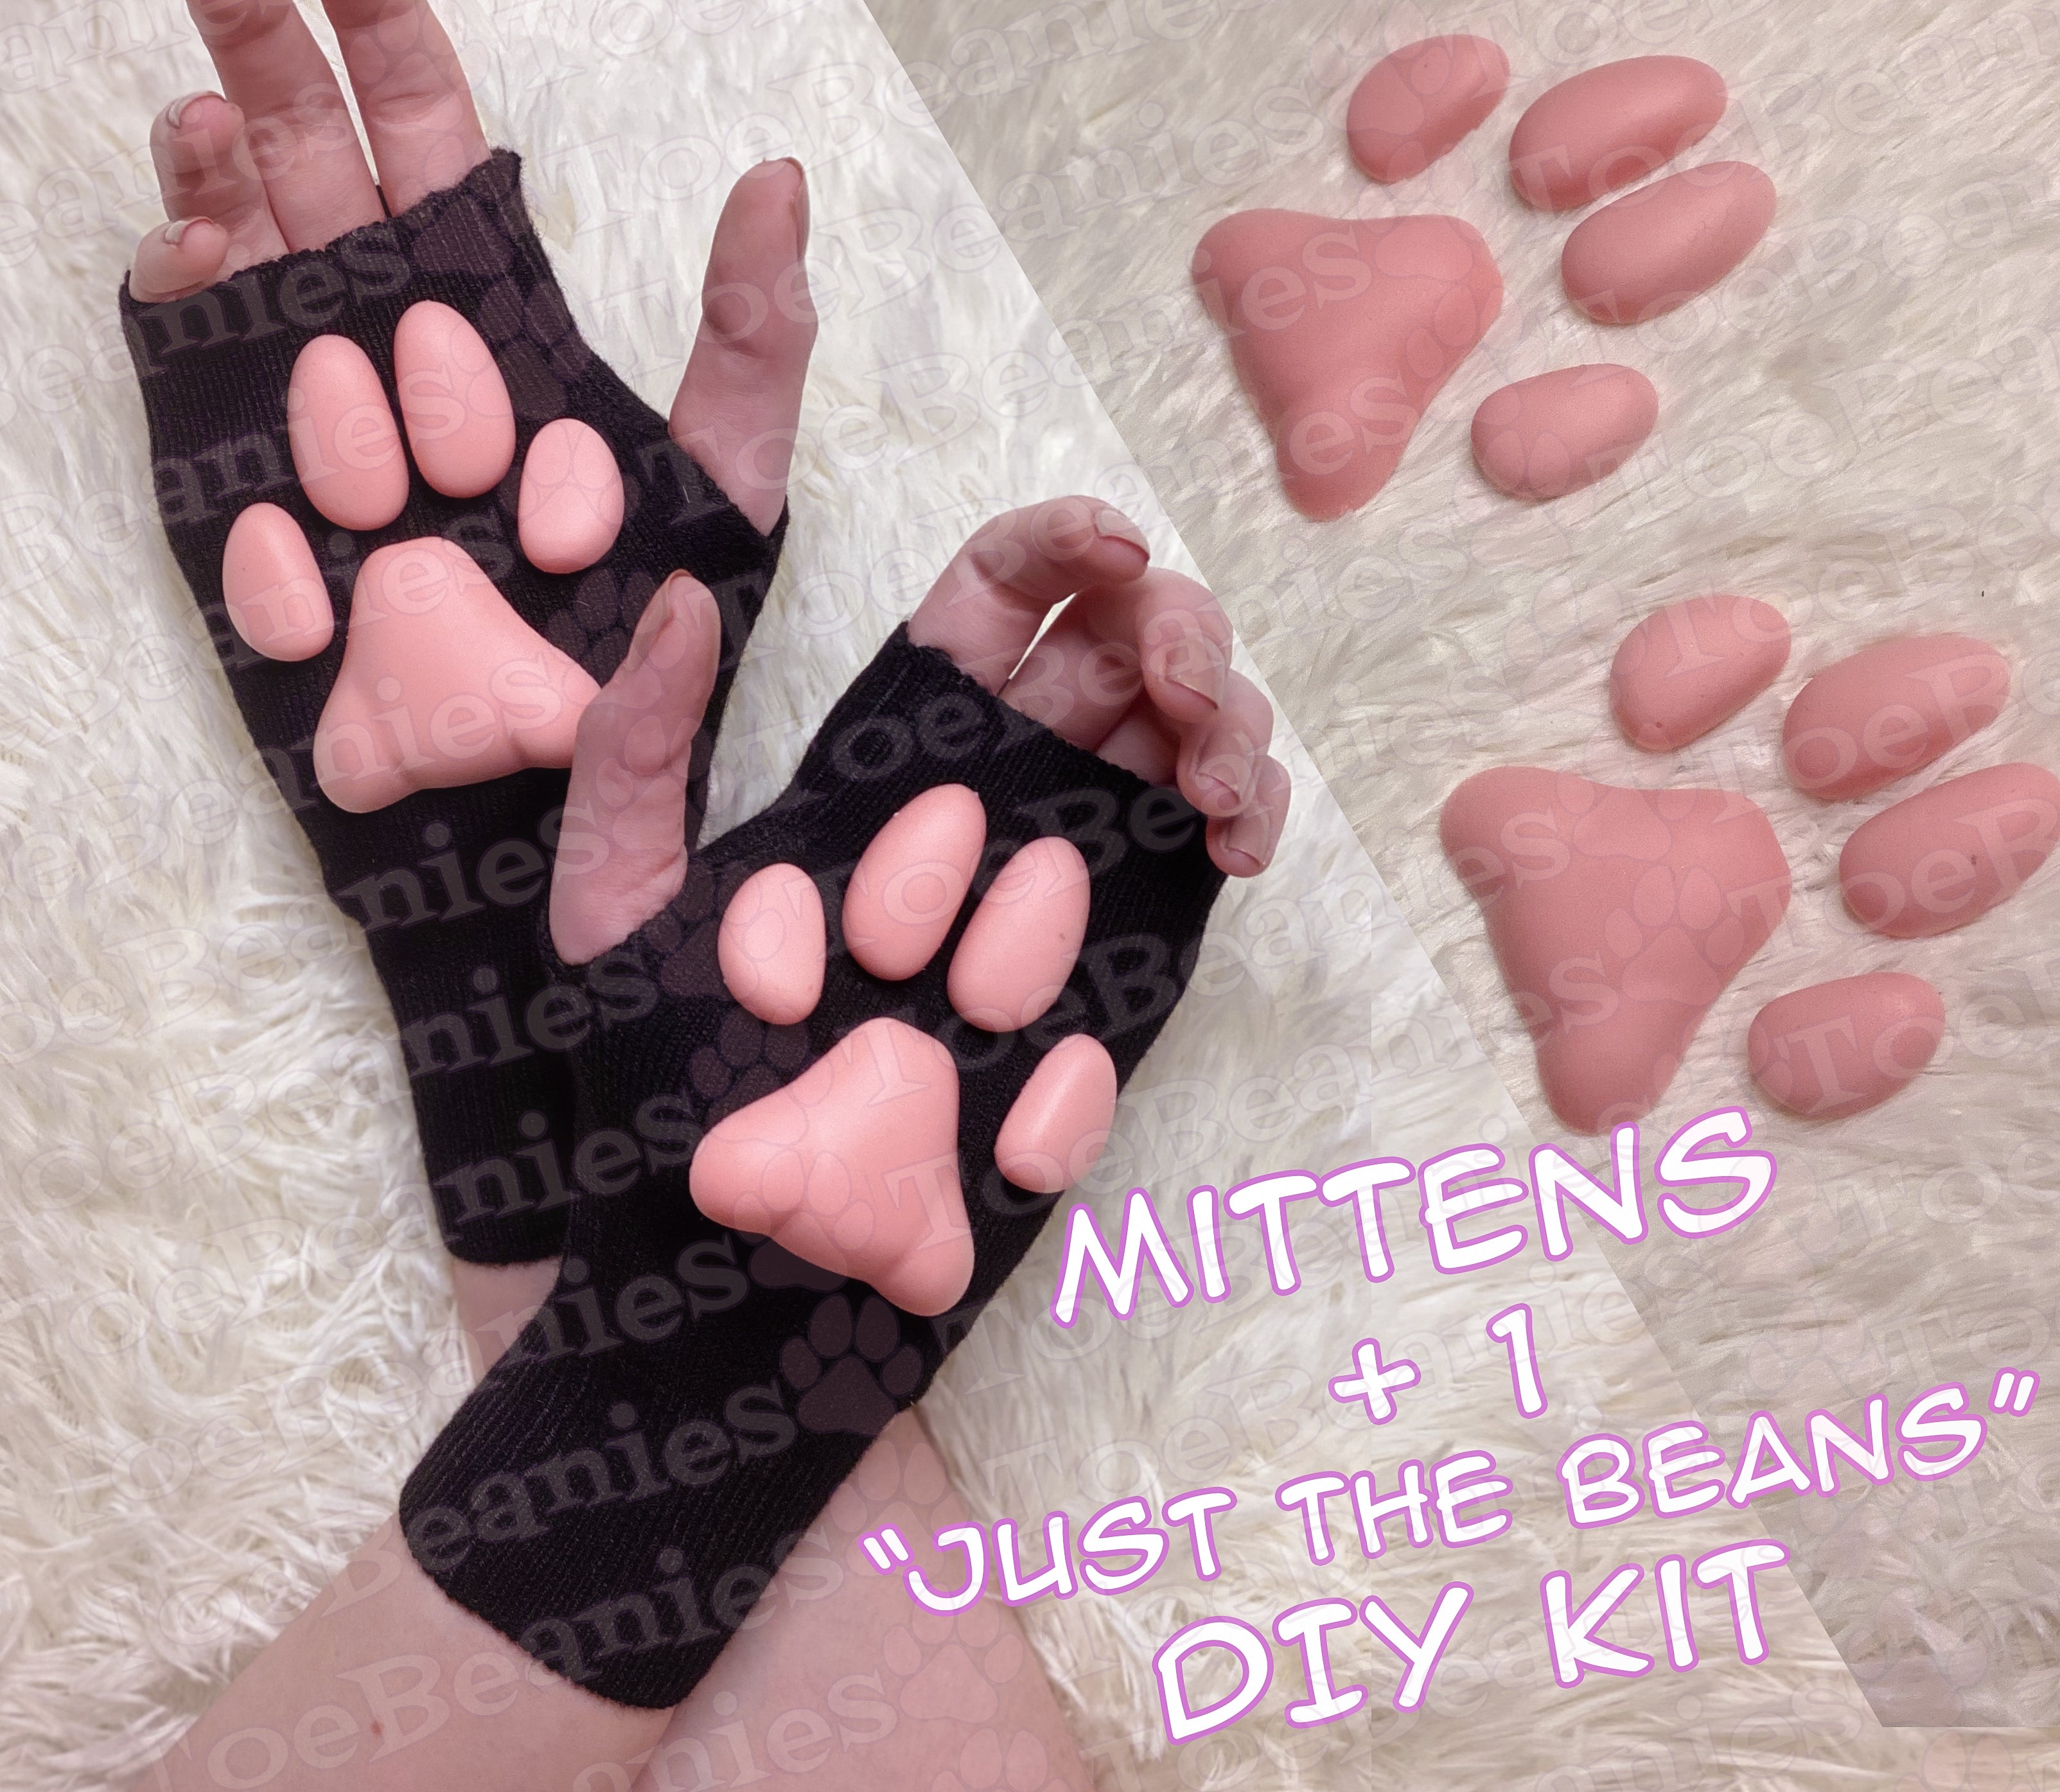 PREORDER SET OF ToeBeanies Pink Kitten Pawpads on Black Mittens + "Just the Beans" DIY Kit